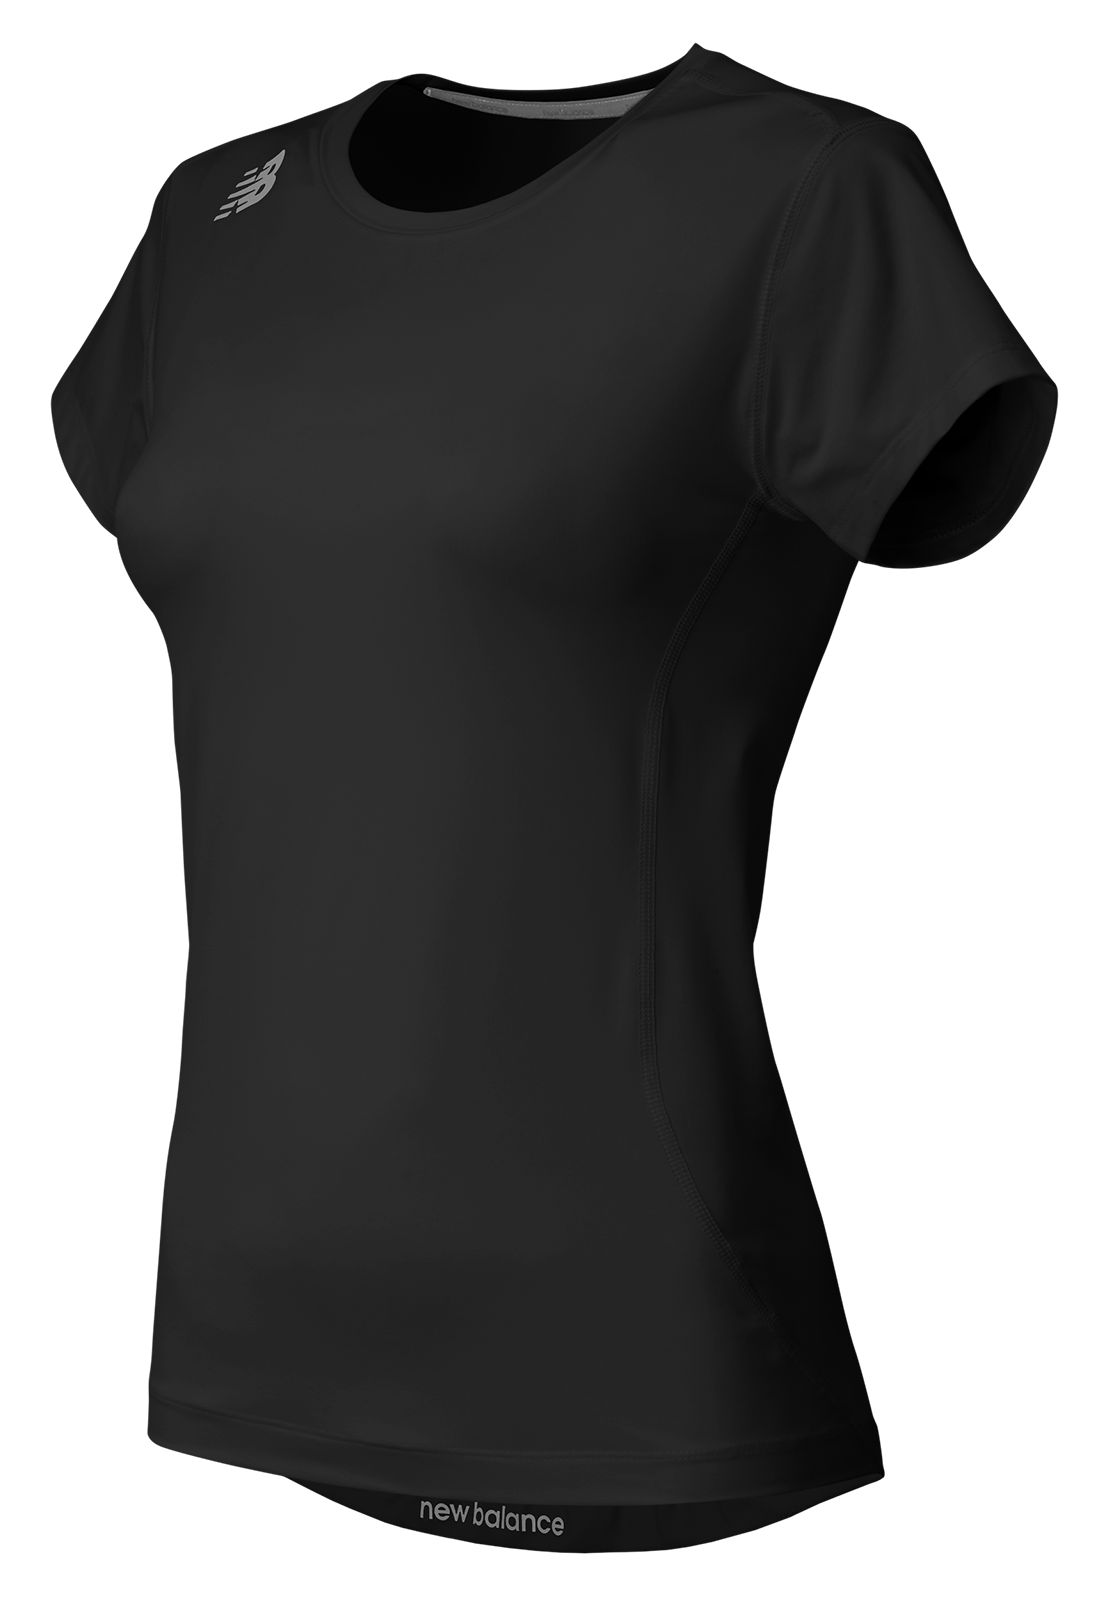  *Markdown*  Women's NB Short Sleeve Compression Top